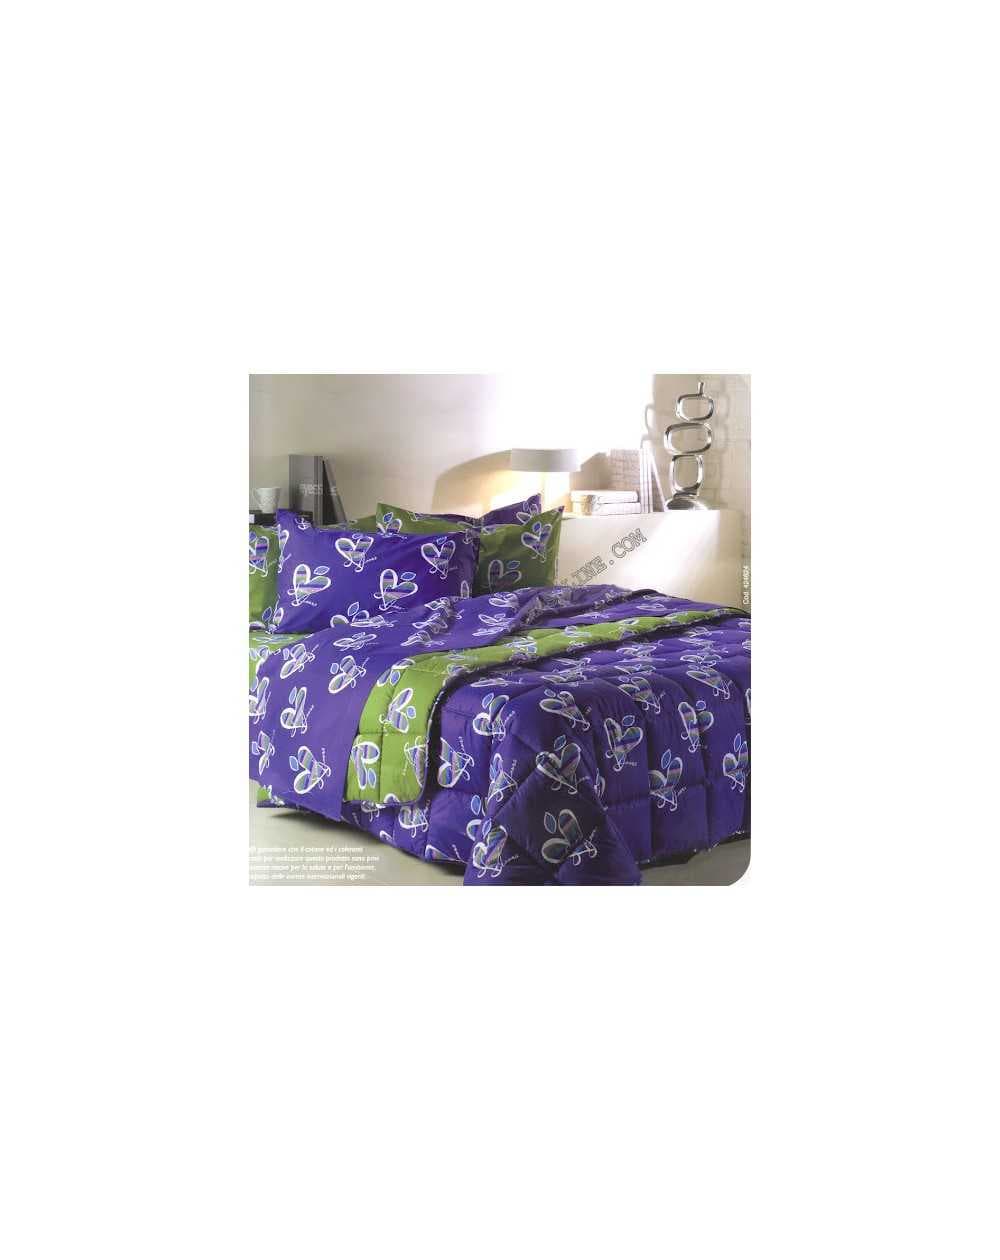 Duvet Set - a fitted sheet Sweet Years Trendy Caleffi